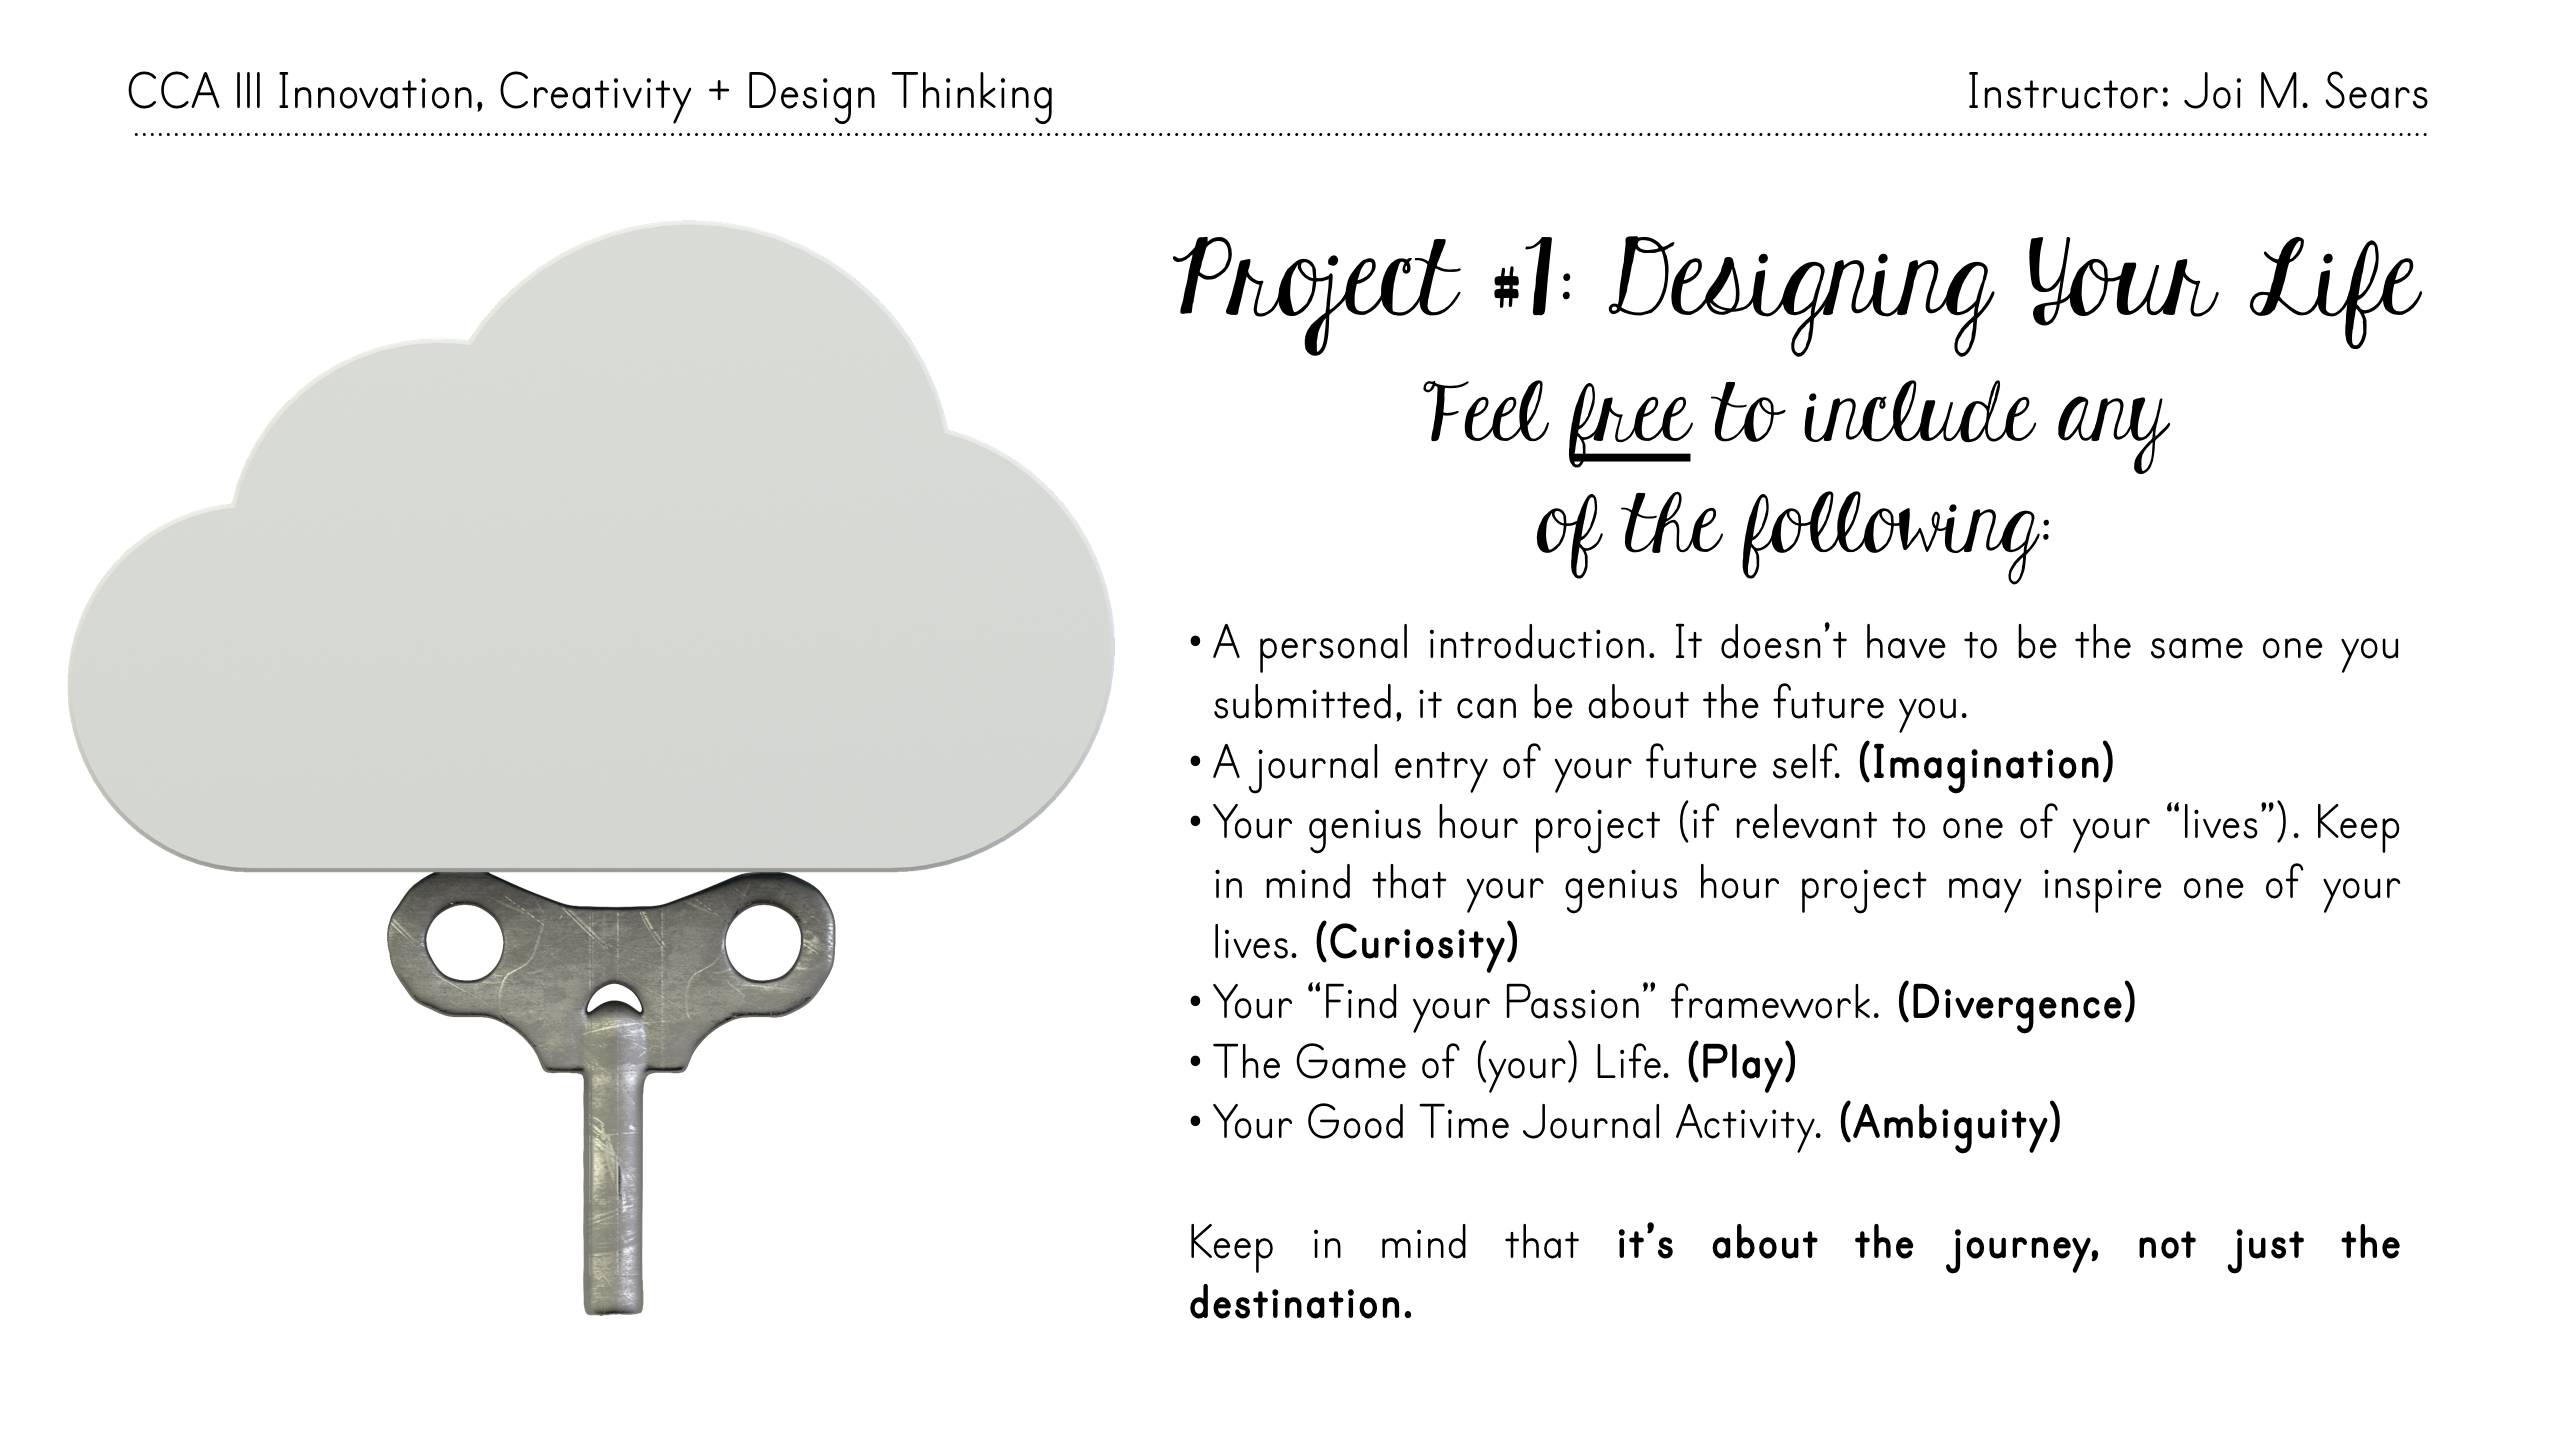 Design Your Life Projects.png